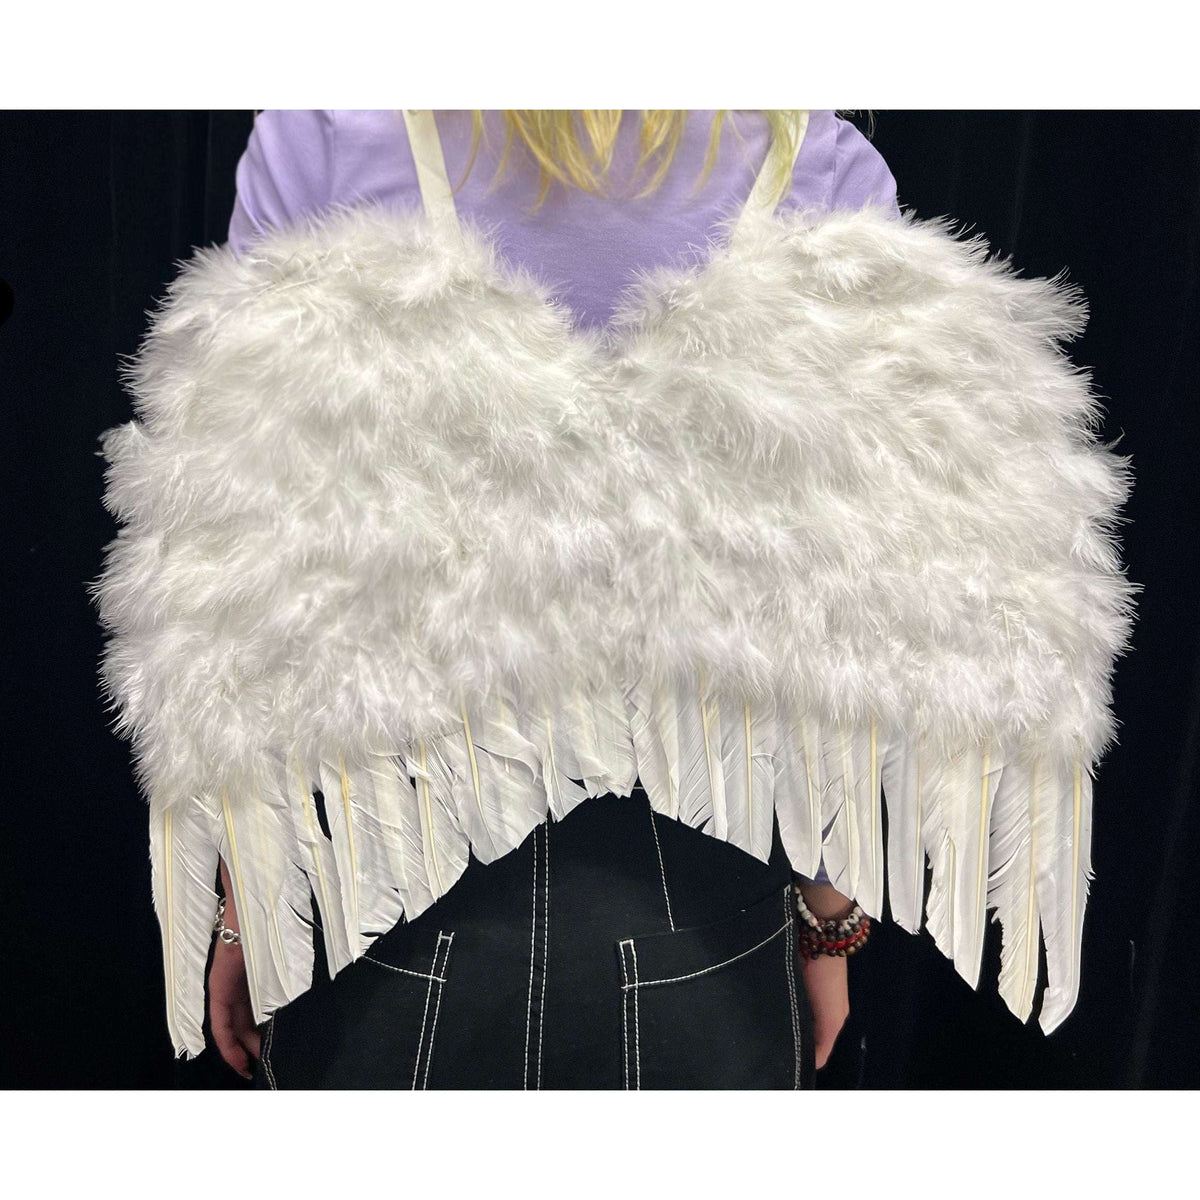 36" Flexible White Feather Wings